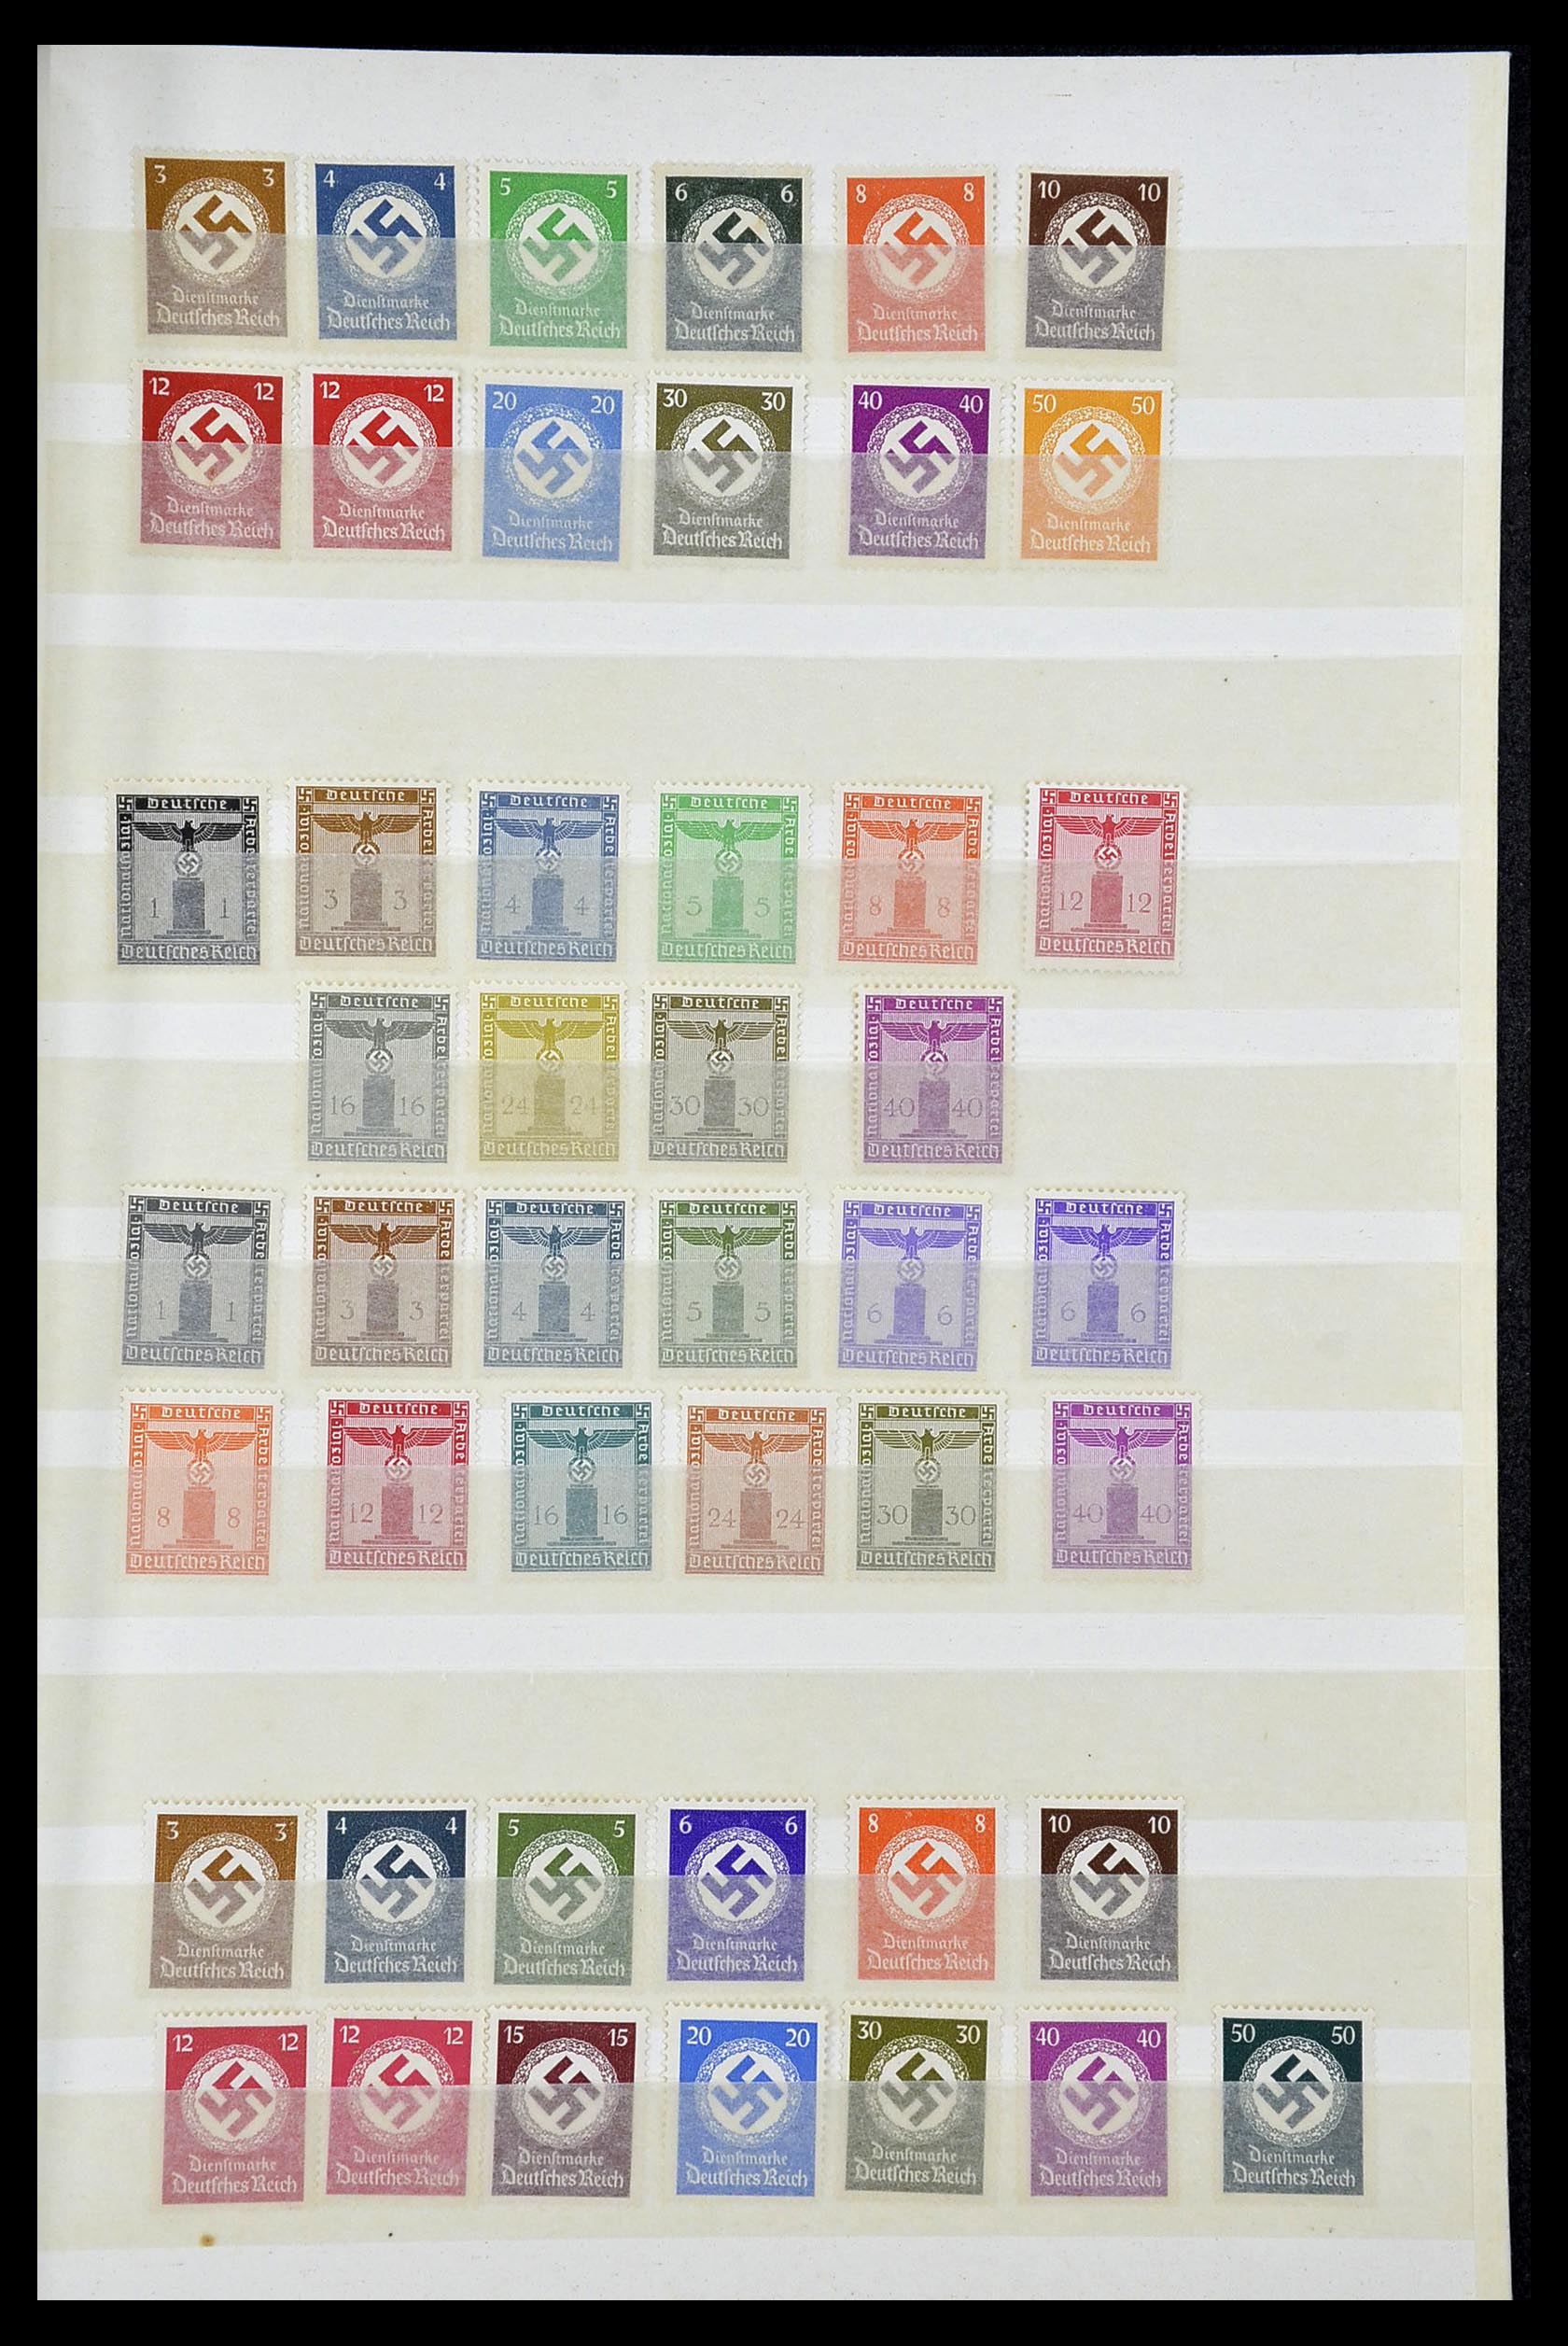 35016 024 - Stamp Collection 35016 Duitse Rijk service stamps 1903-1942.